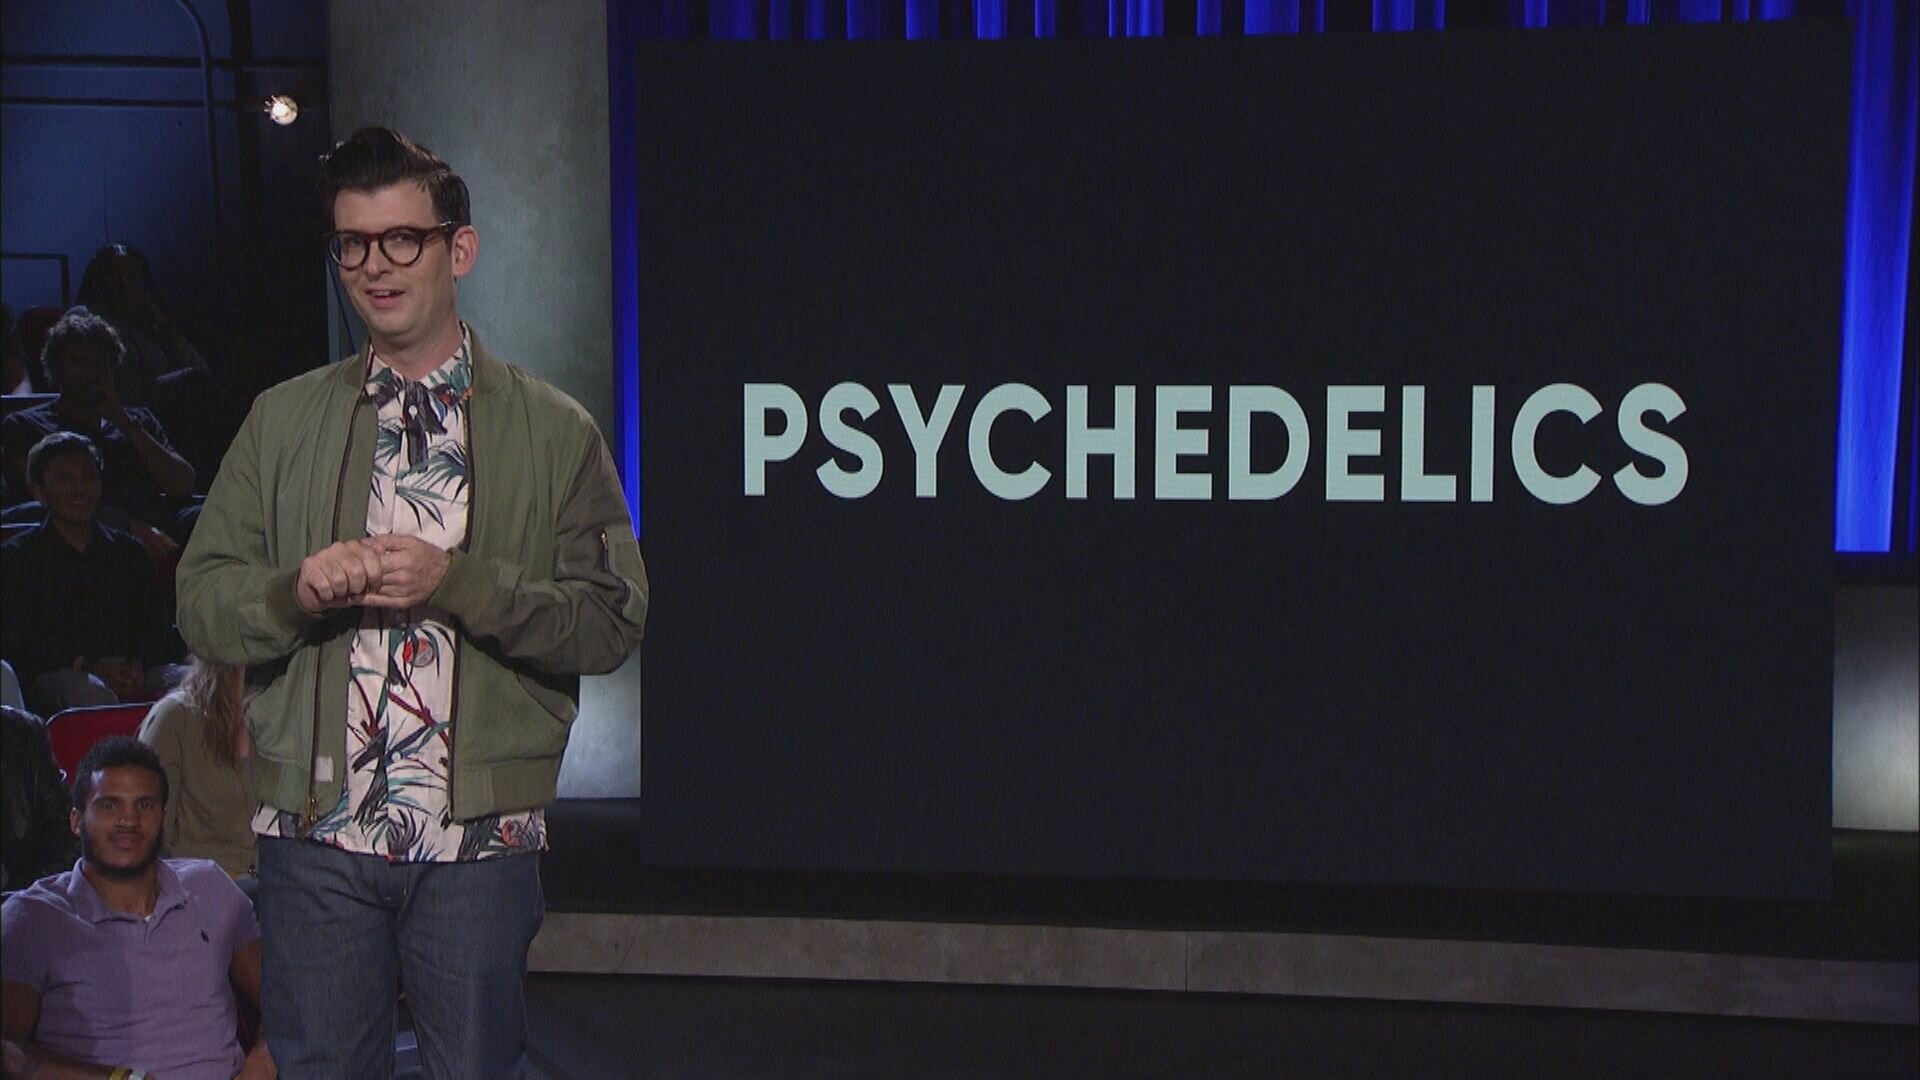 Problematic with Moshe Kasher S1E7 Psychedelics: Medicine or Madness?